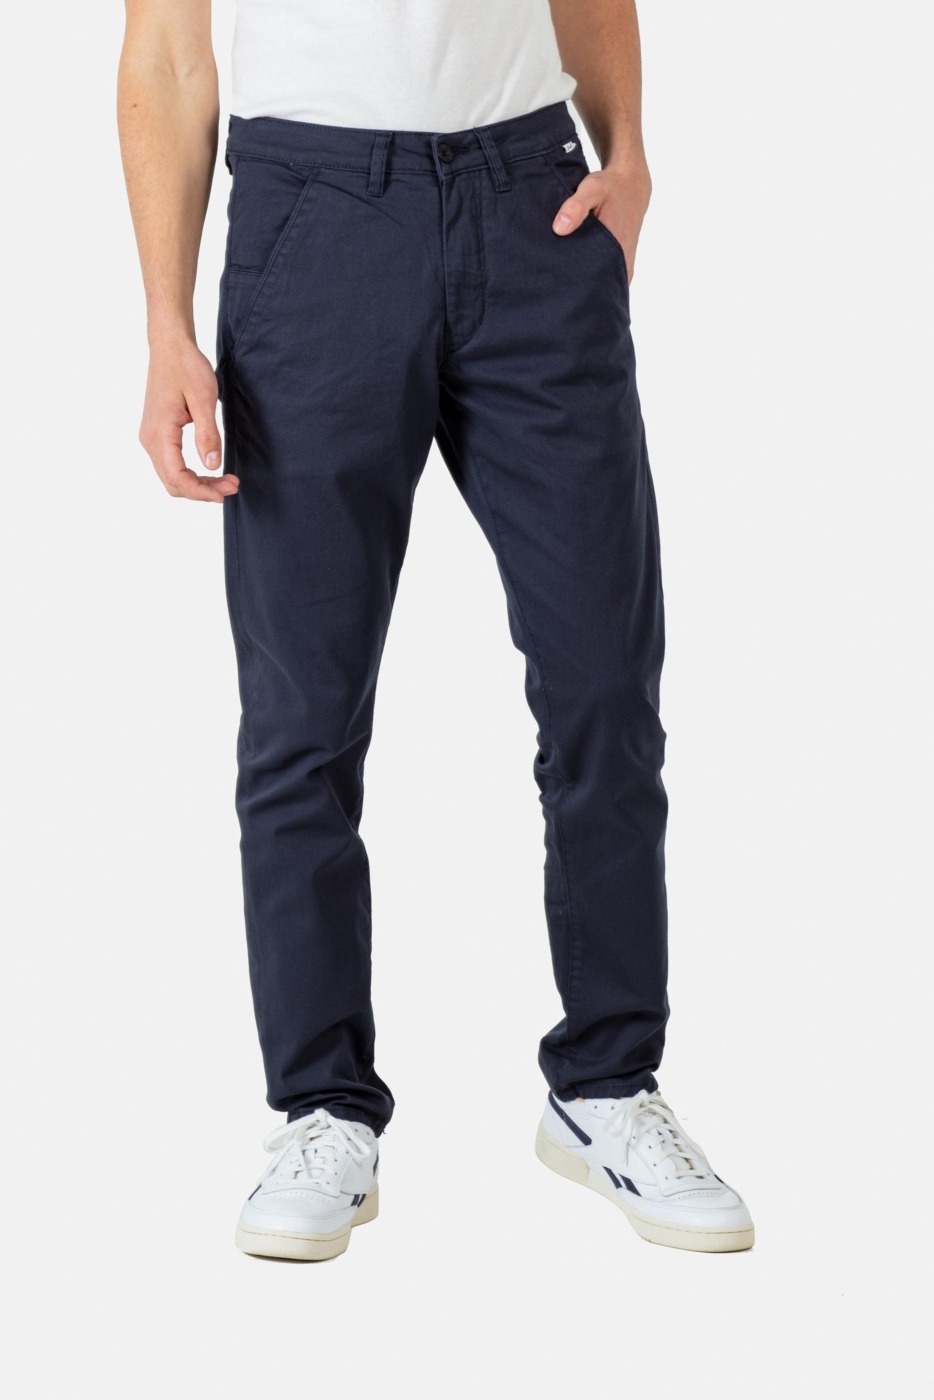 Reell Flex Tapered Chino Pants navy